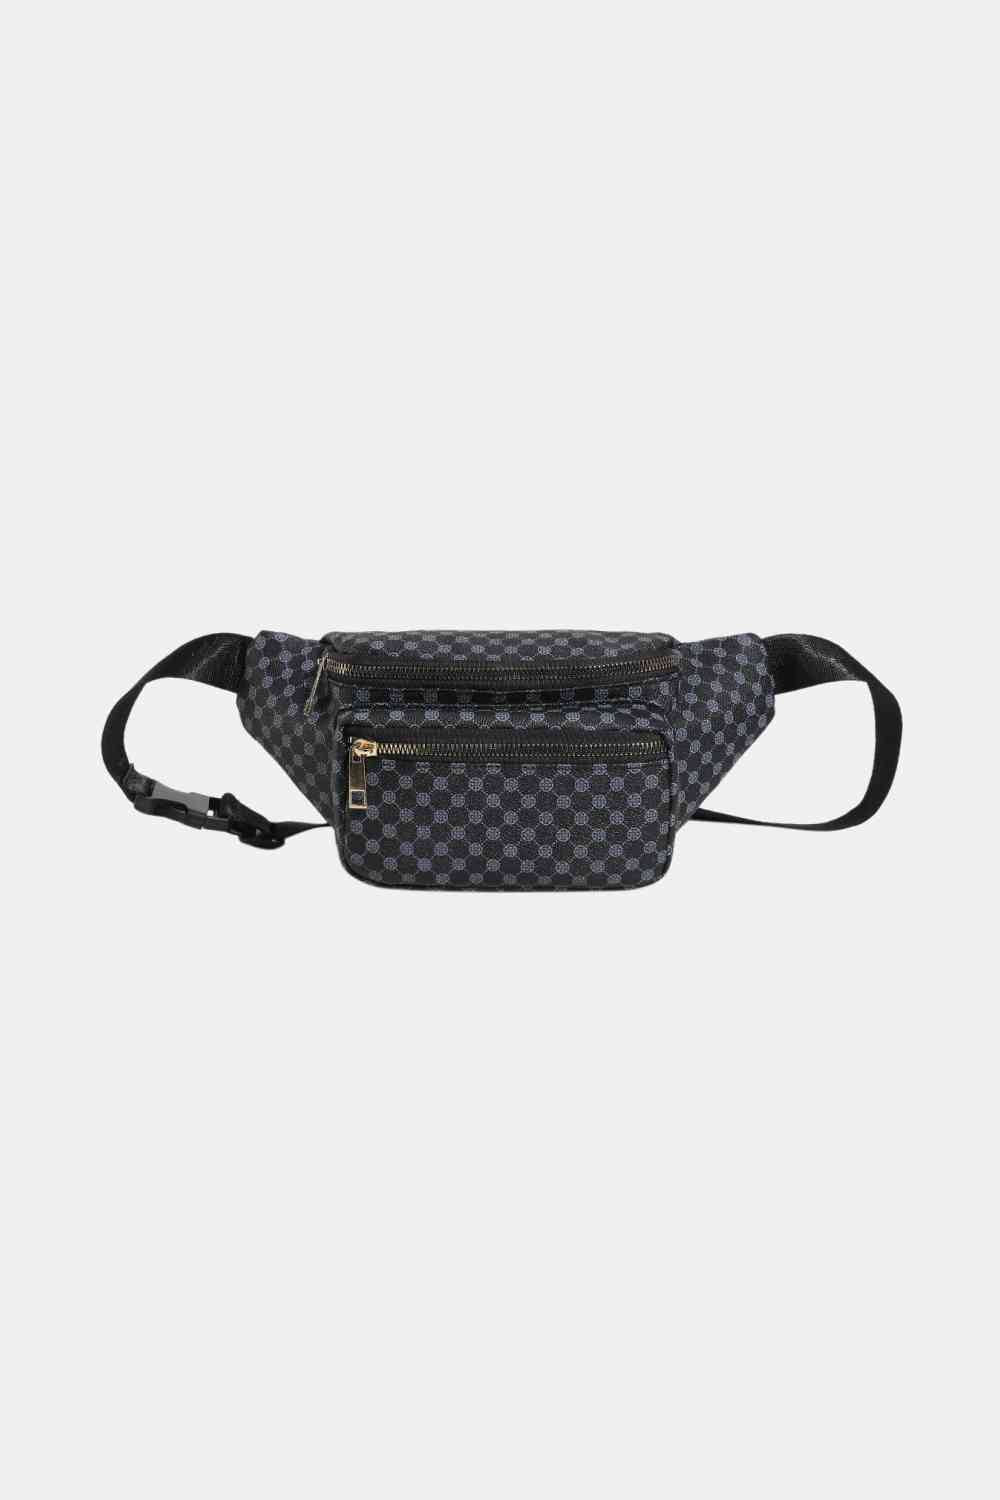 Cupid Beauty Supplies Cupid Beauty Supplies Black / One Size Women Sling Bag Small Printed PU Leather Sling Bag - Trendy and Compact